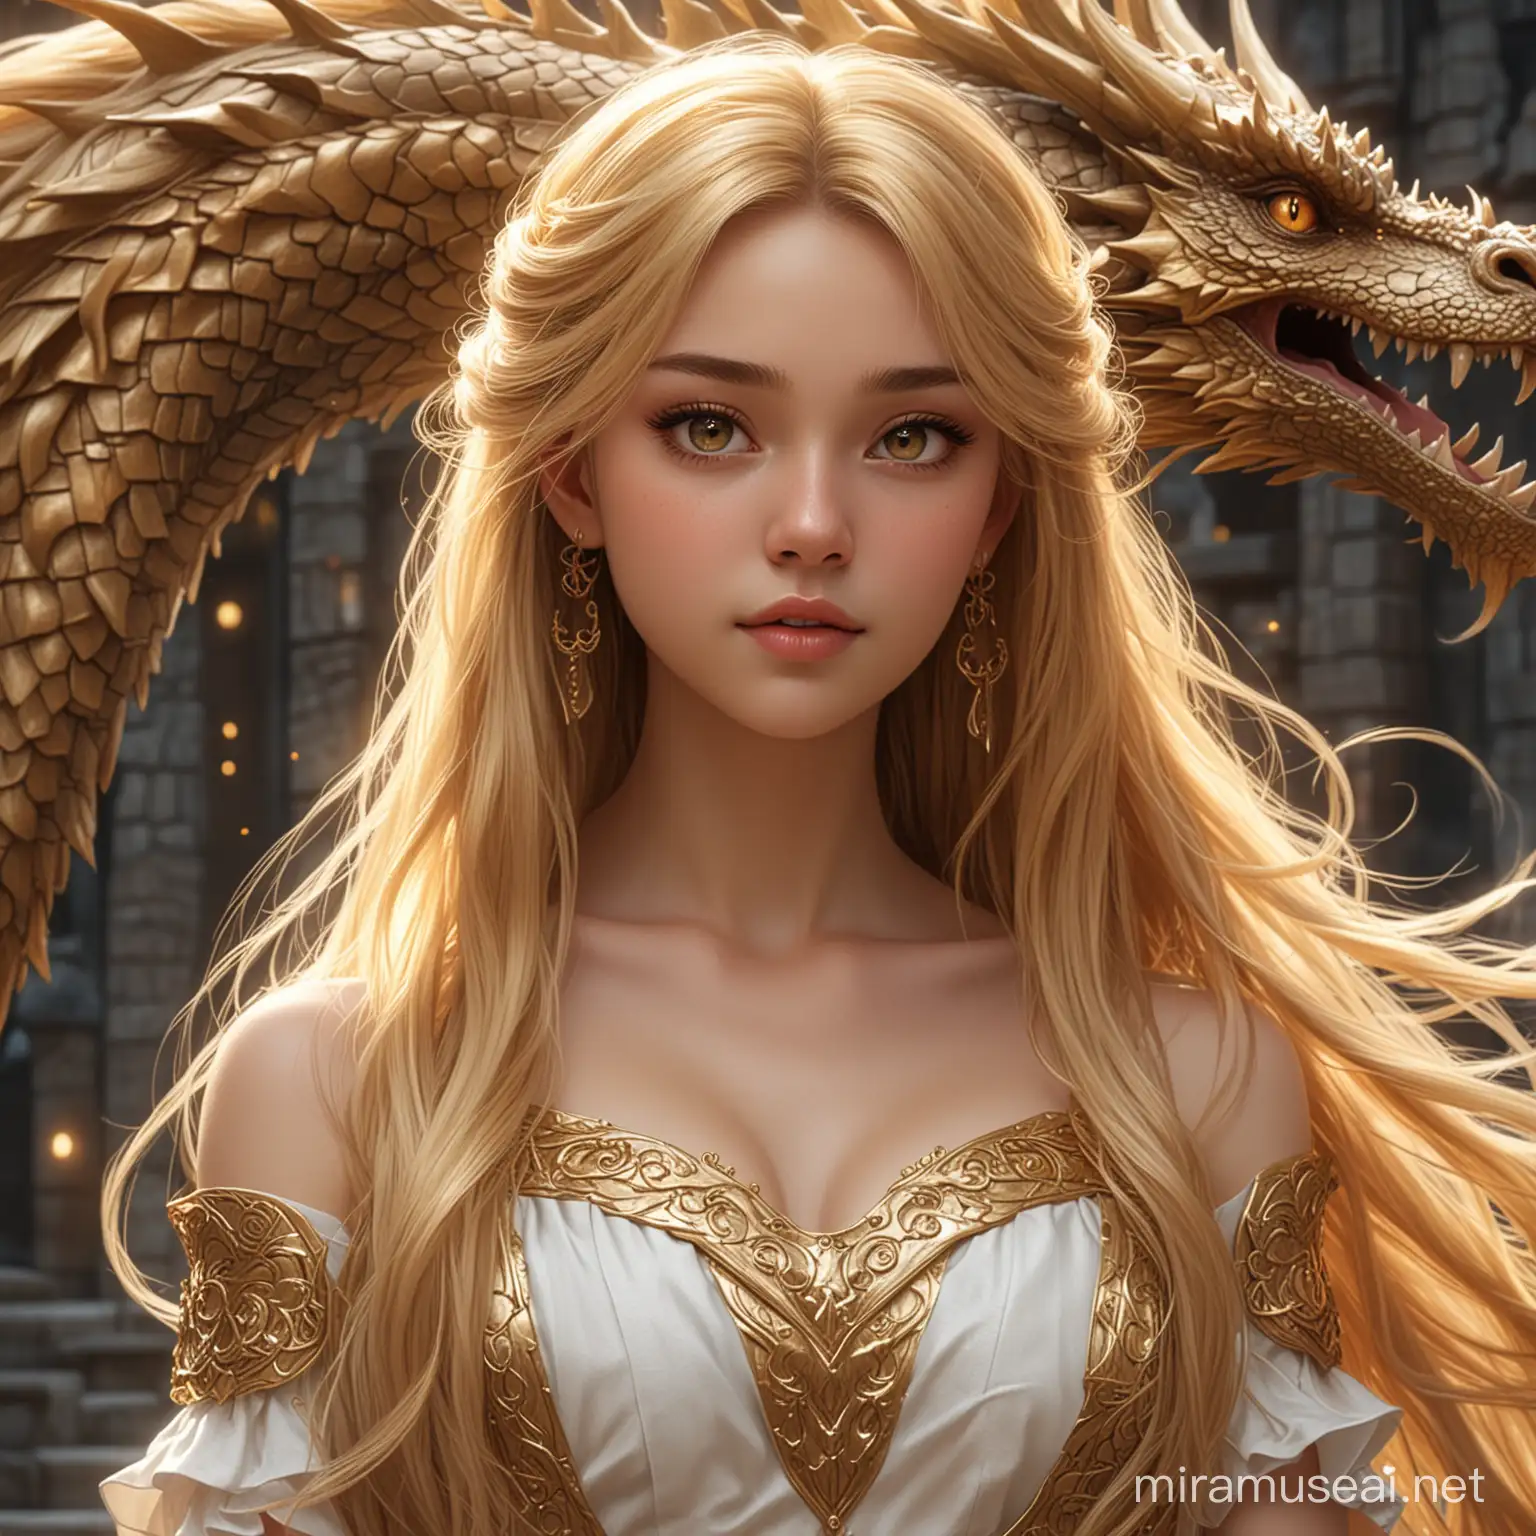 GoldenHaired Princess with Dragon in Fantasy Realism Art